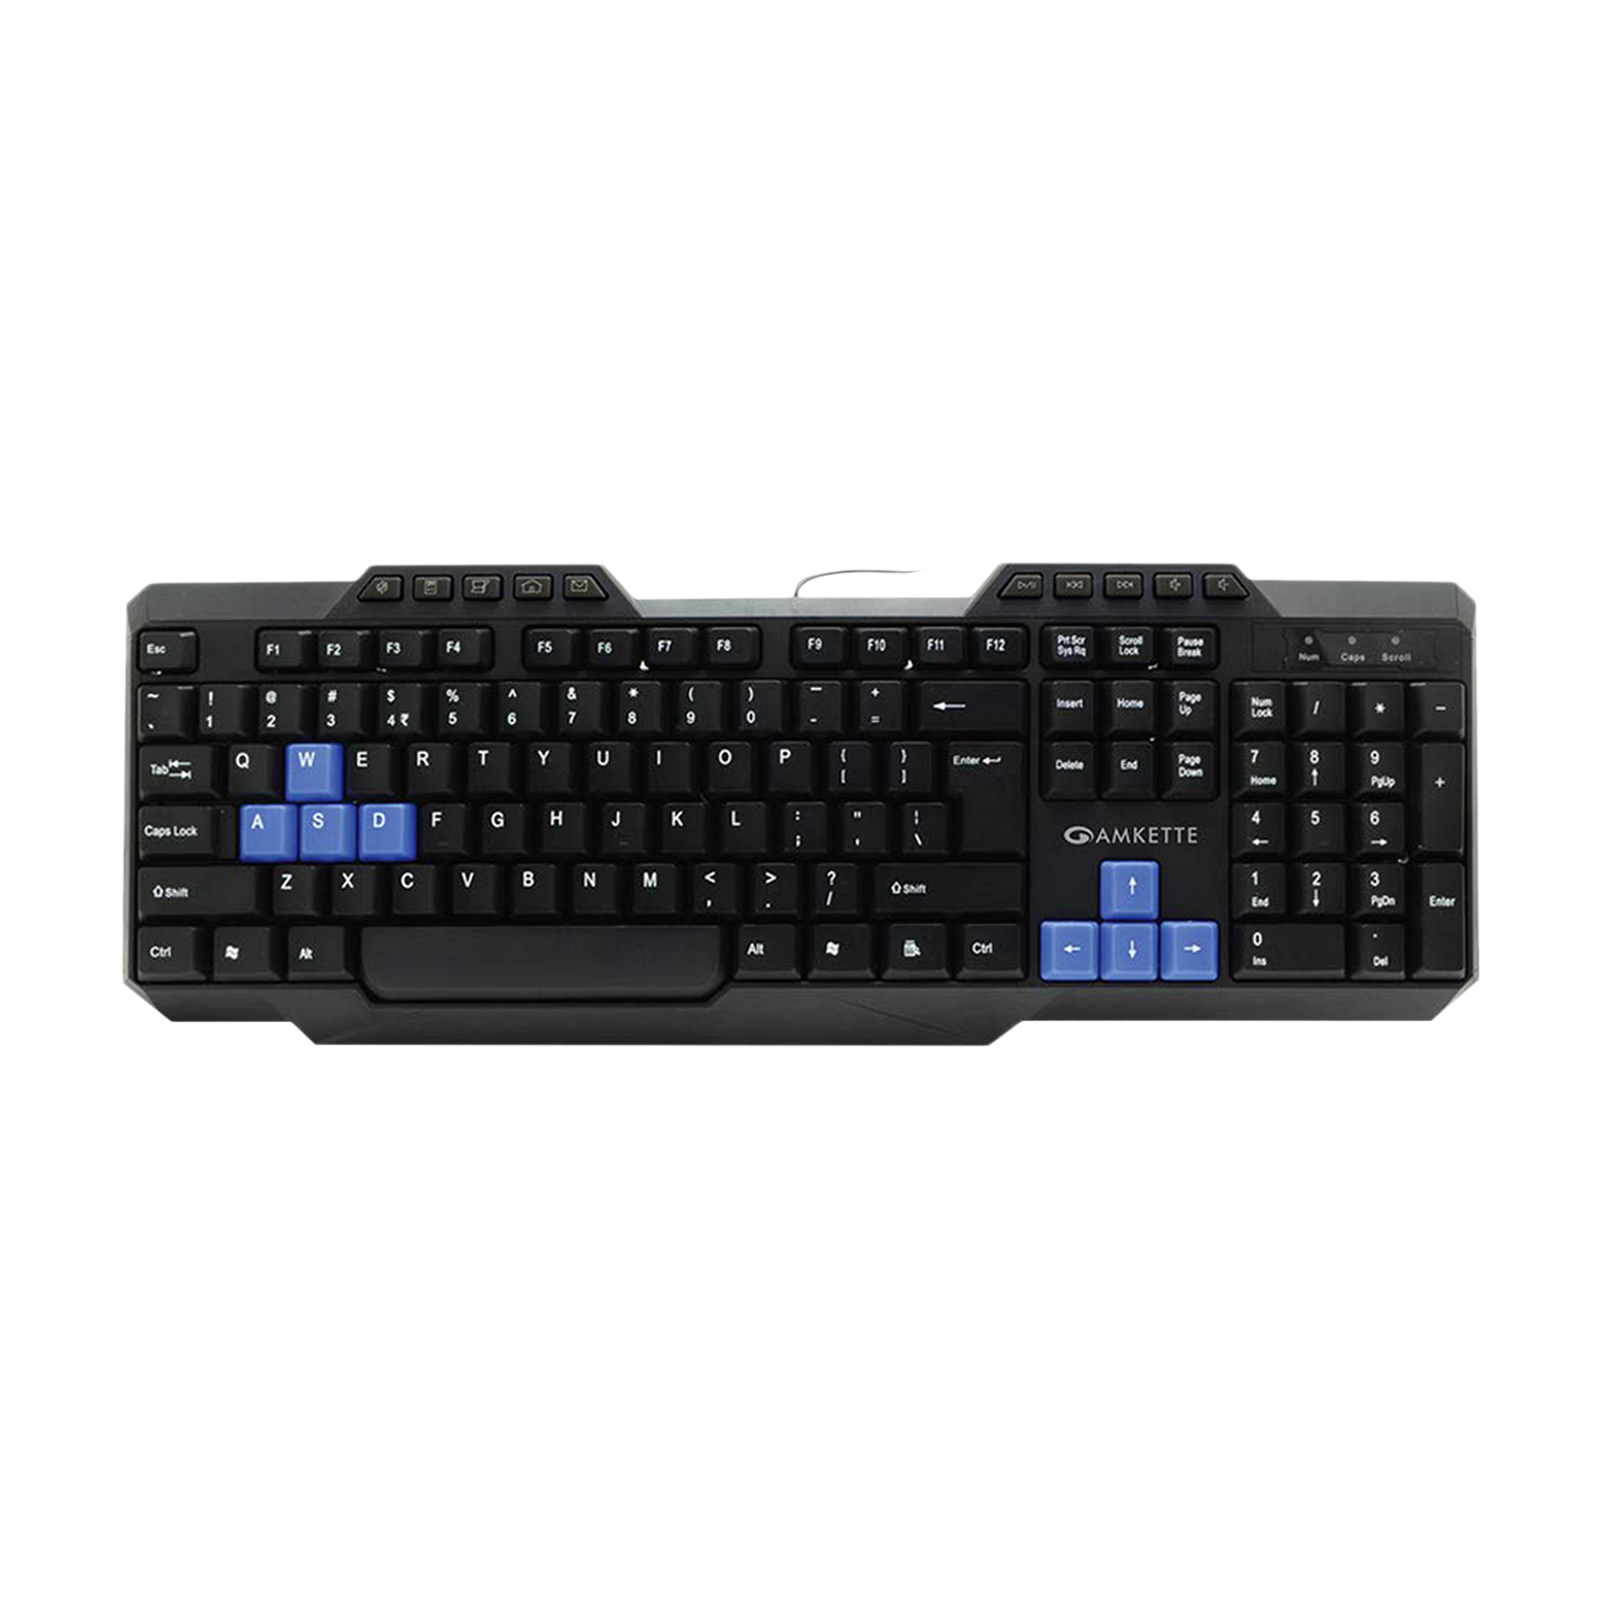 Amkette Xcite Neo Wired Keyboard & Mouse Combo (1000 DPI, Spill Resistant, Black)_2